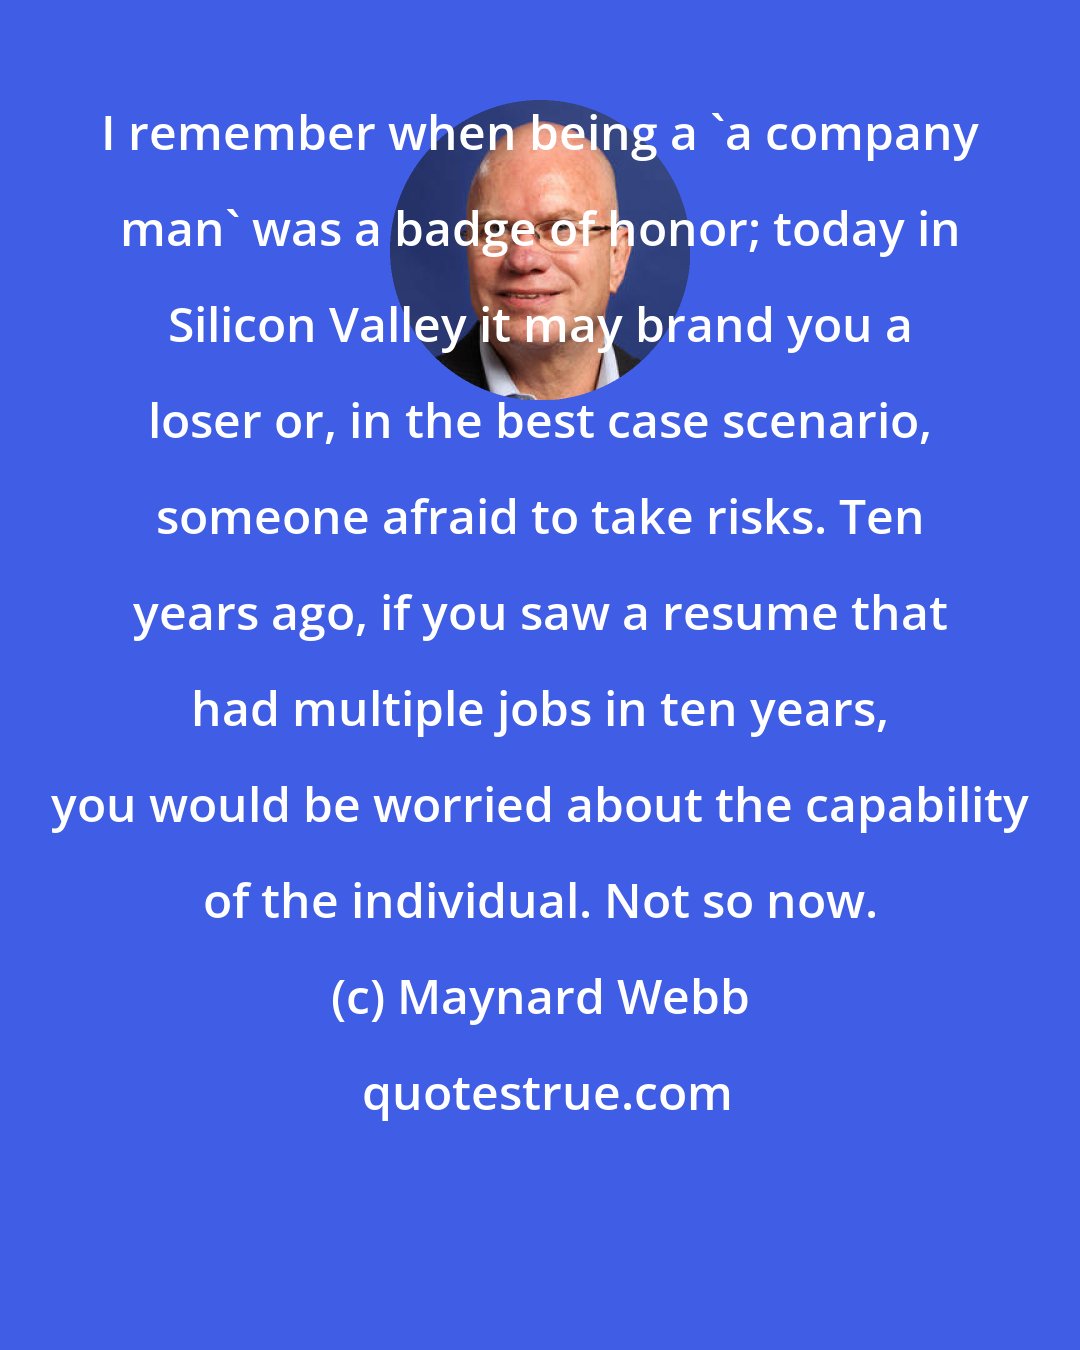 Maynard Webb: I remember when being a 'a company man' was a badge of honor; today in Silicon Valley it may brand you a loser or, in the best case scenario, someone afraid to take risks. Ten years ago, if you saw a resume that had multiple jobs in ten years, you would be worried about the capability of the individual. Not so now.